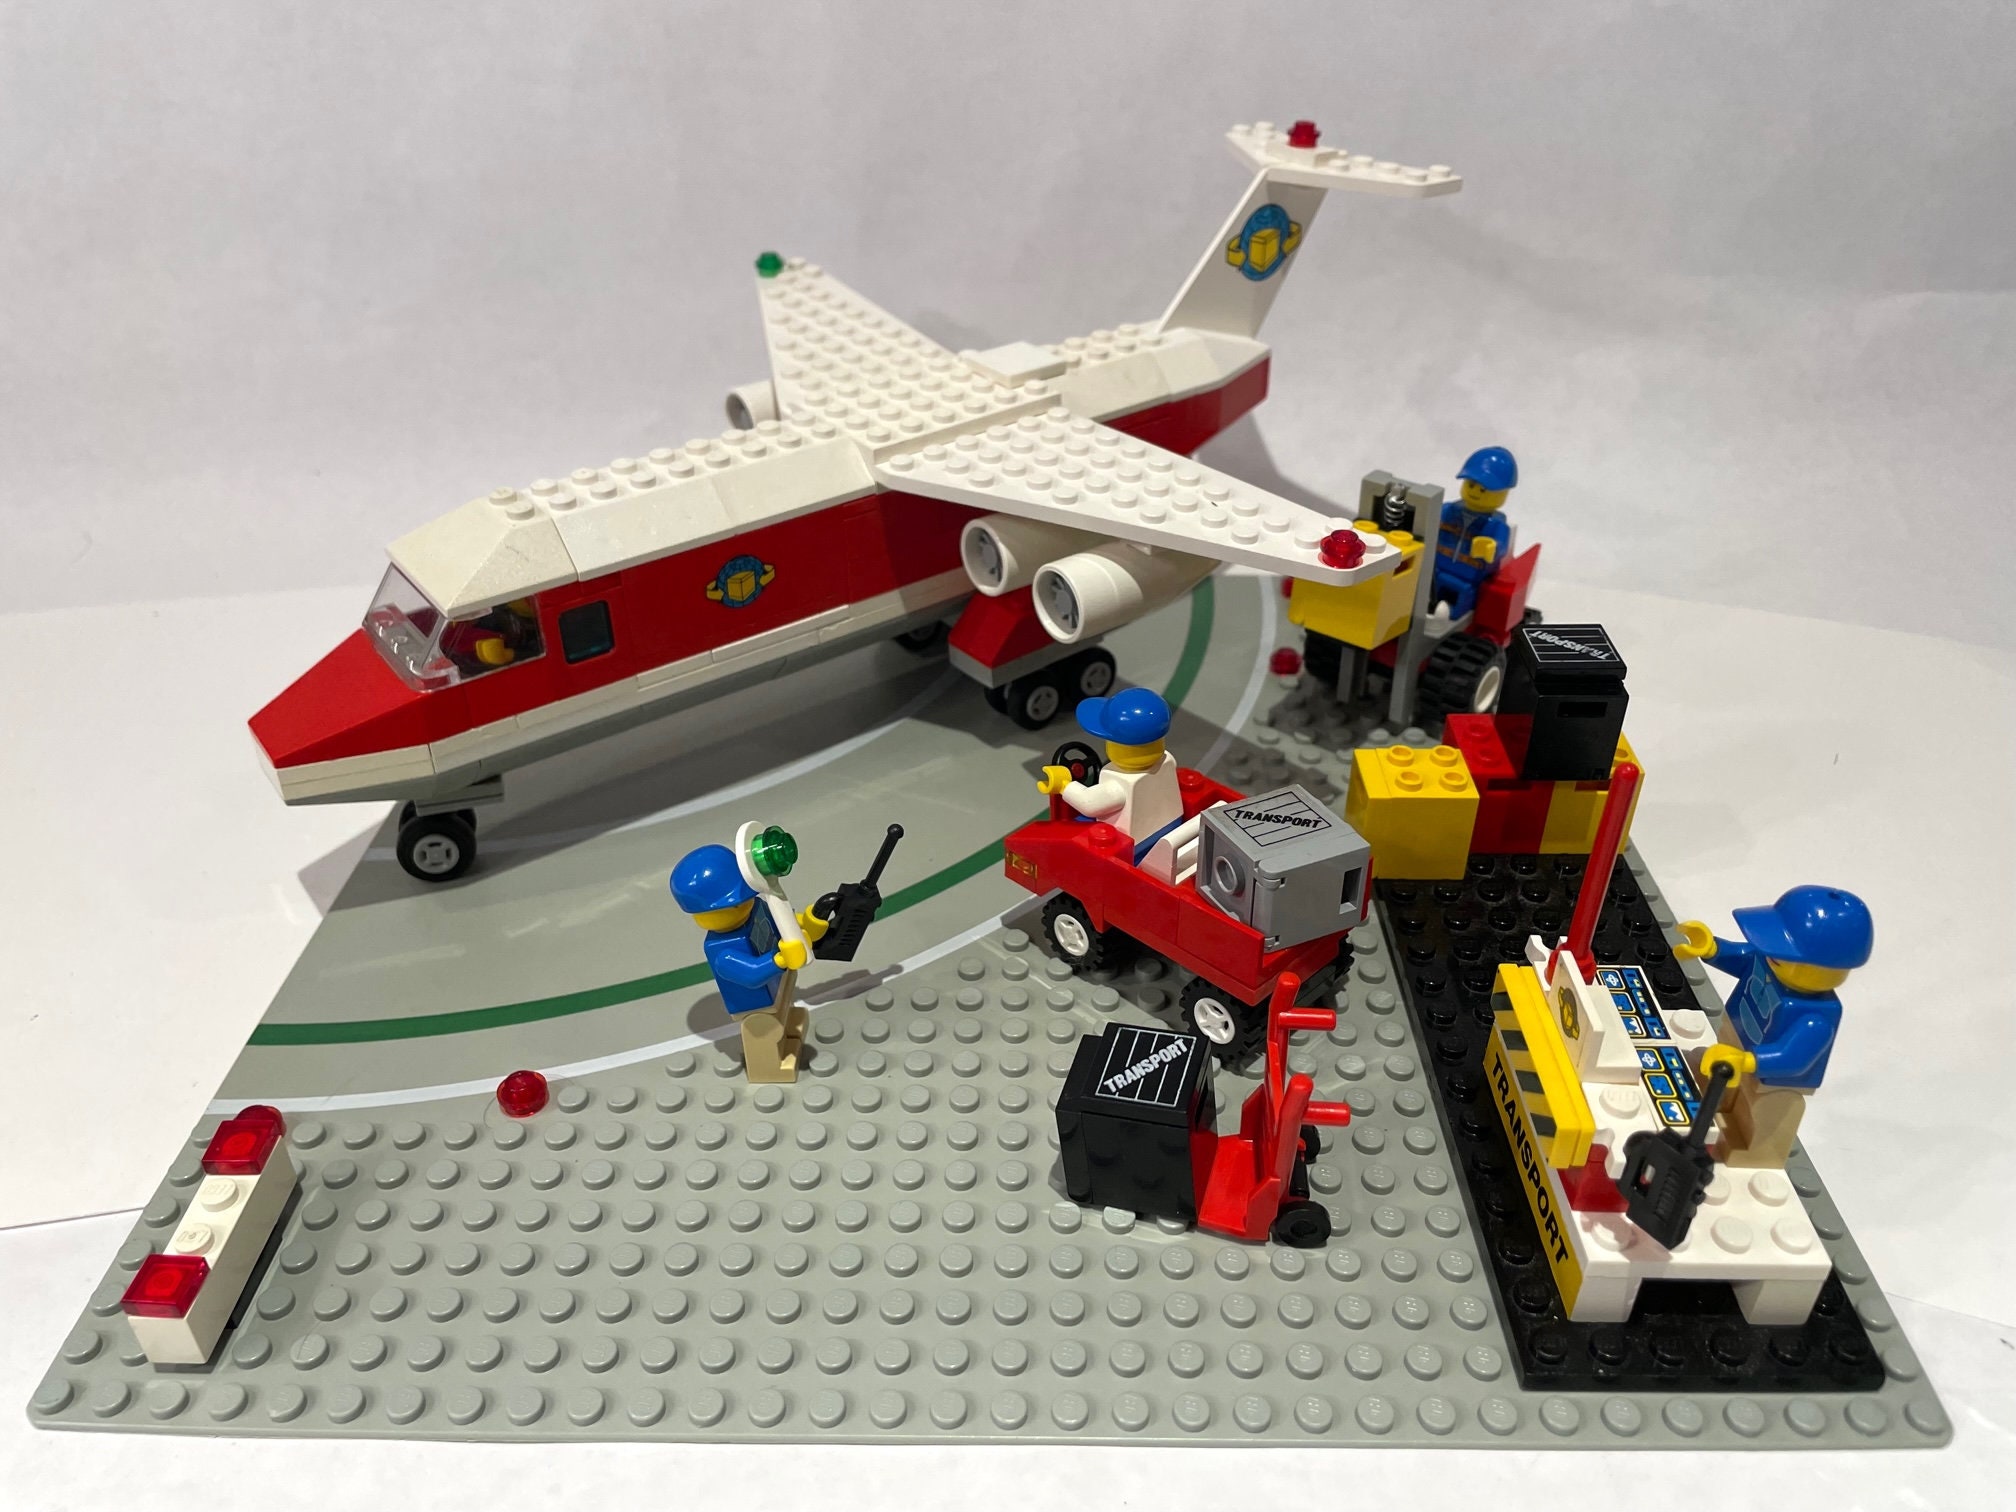 Join the flight of the Concorde with this beautiful 5-foot long LEGO model  - The Brothers Brick